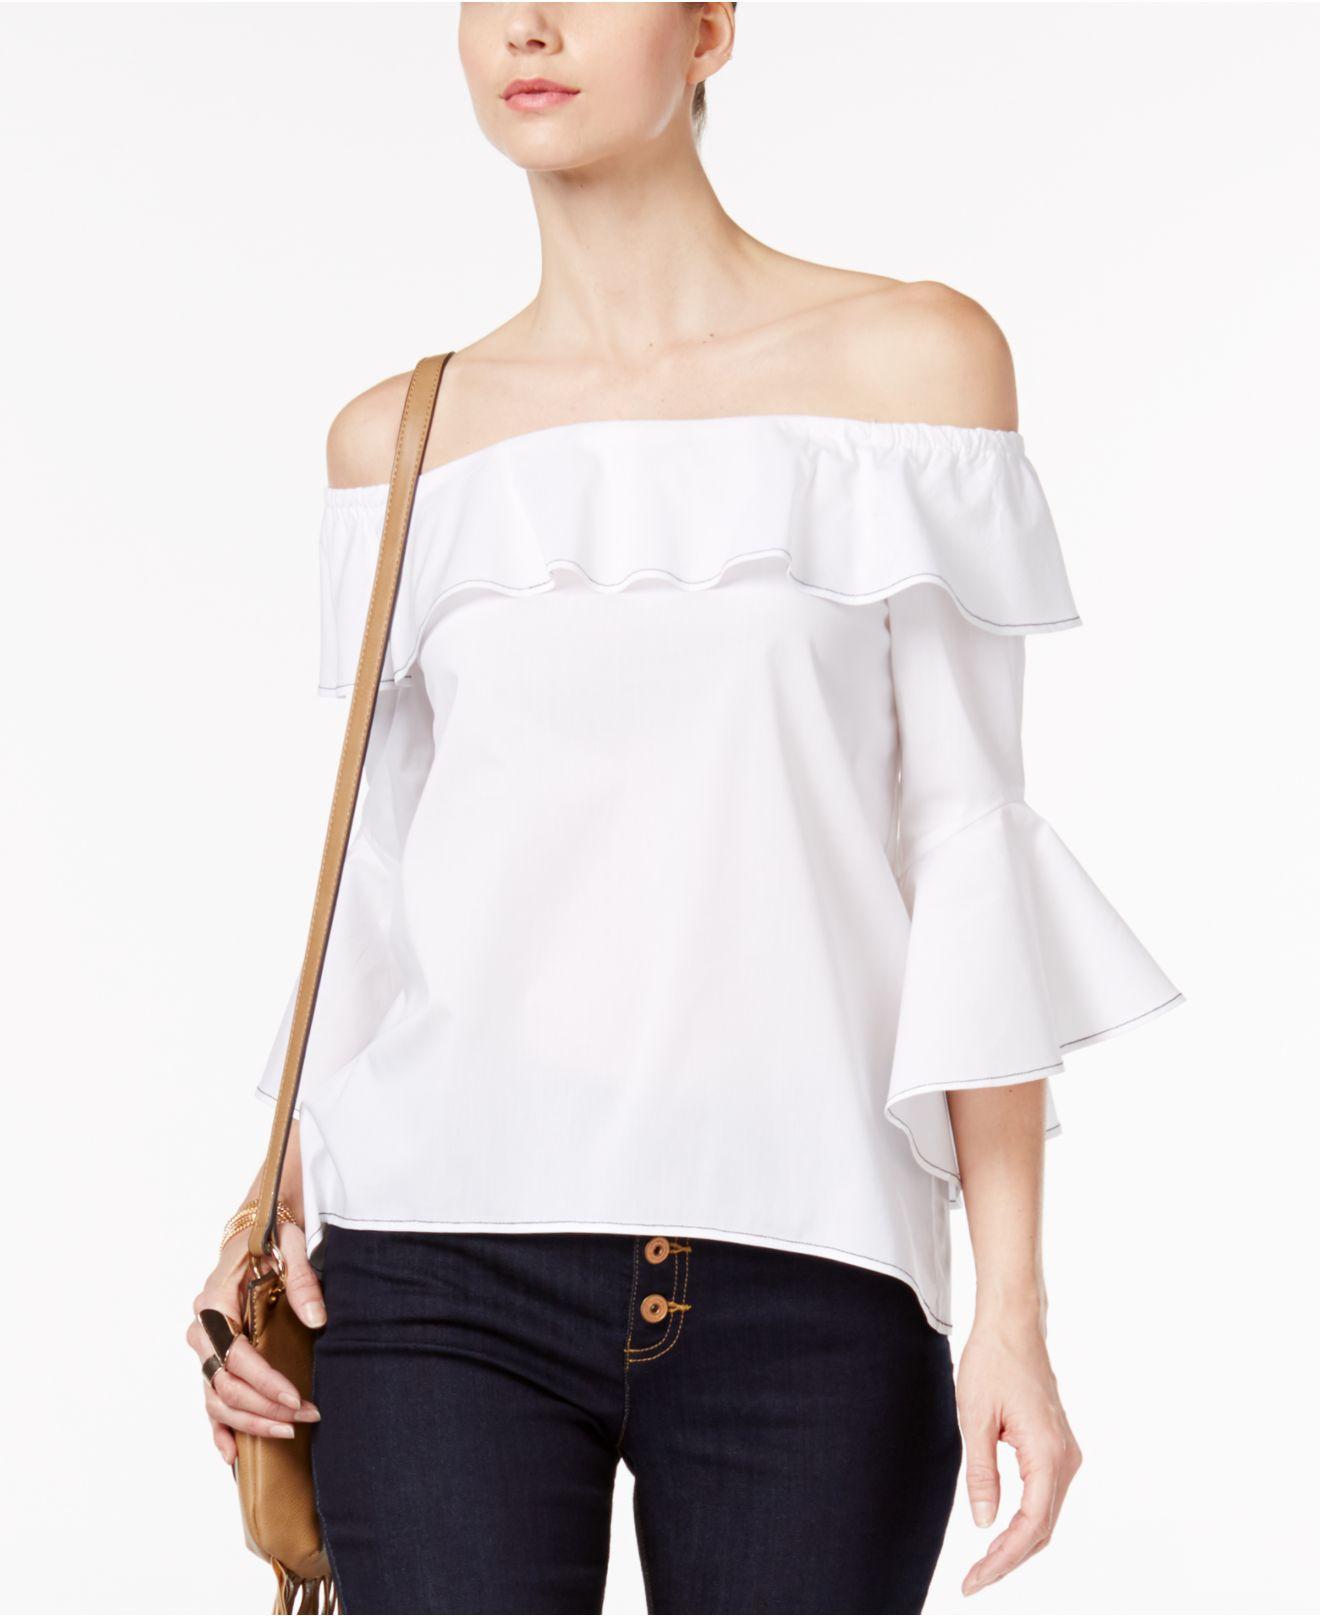 Lyst - Inc International Concepts Ruffled Off-the-shoulder Top in White